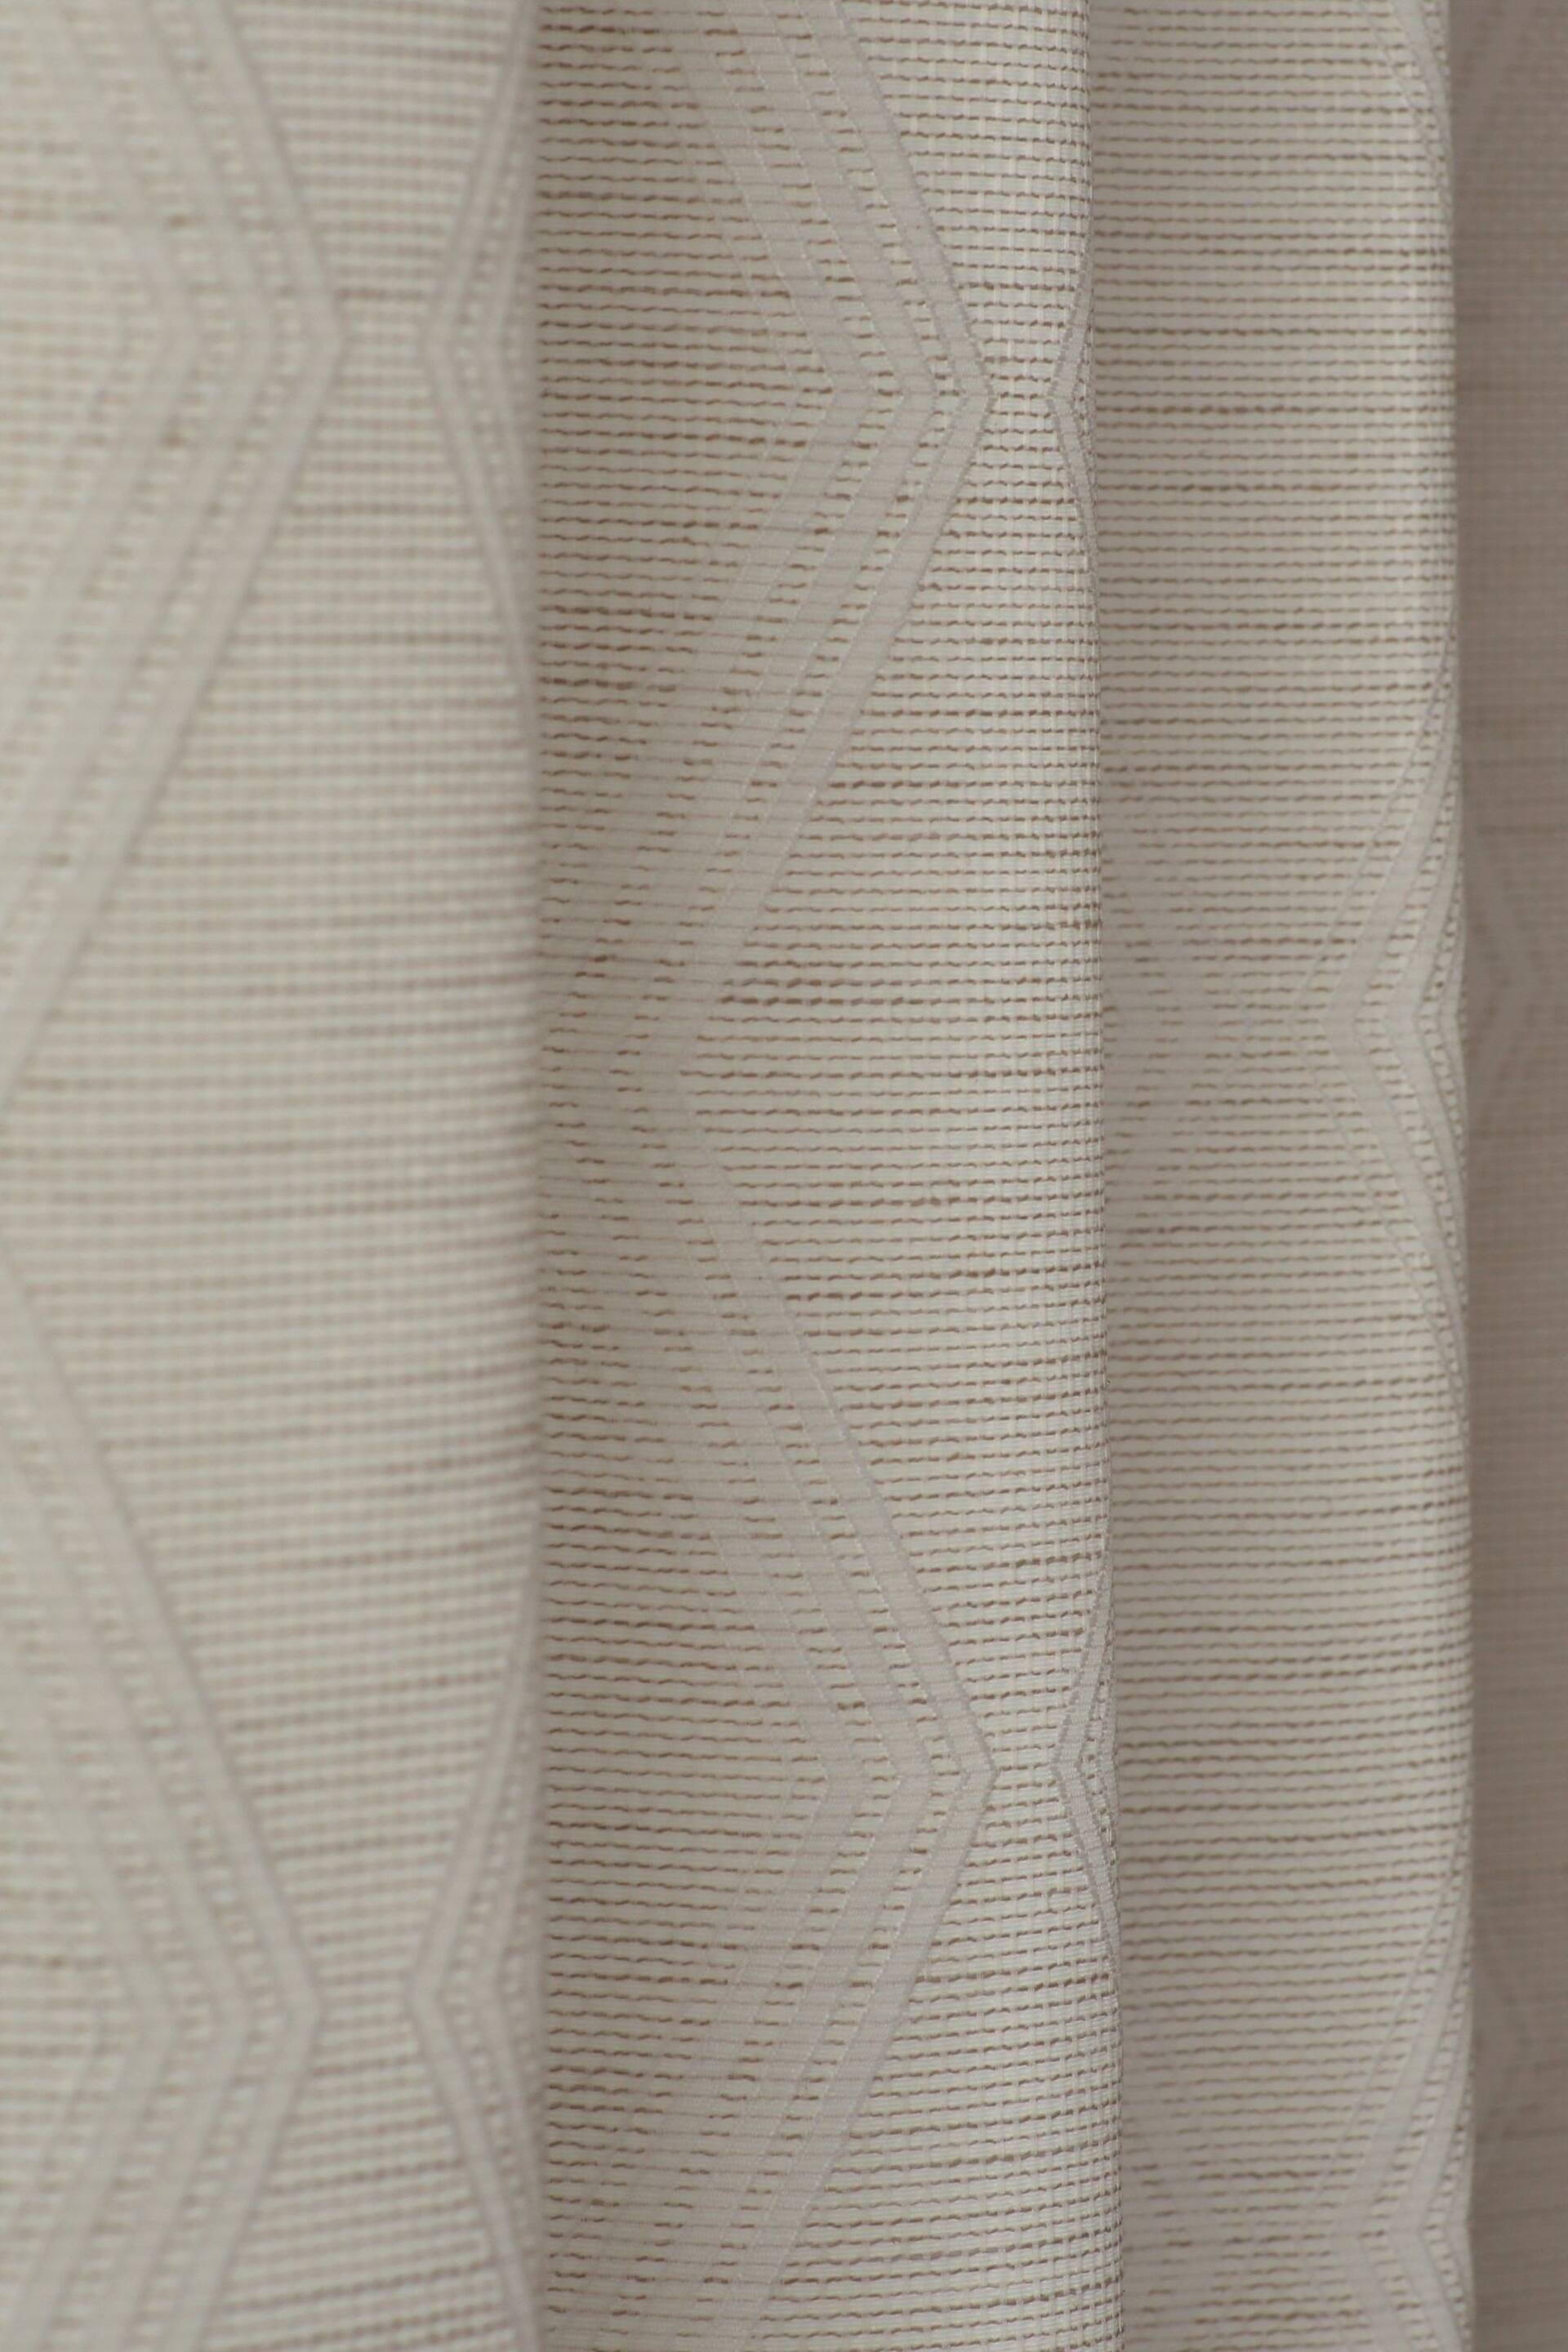 Natural Next Textured Jacquard Eyelet Lined Curtains - Image 5 of 6